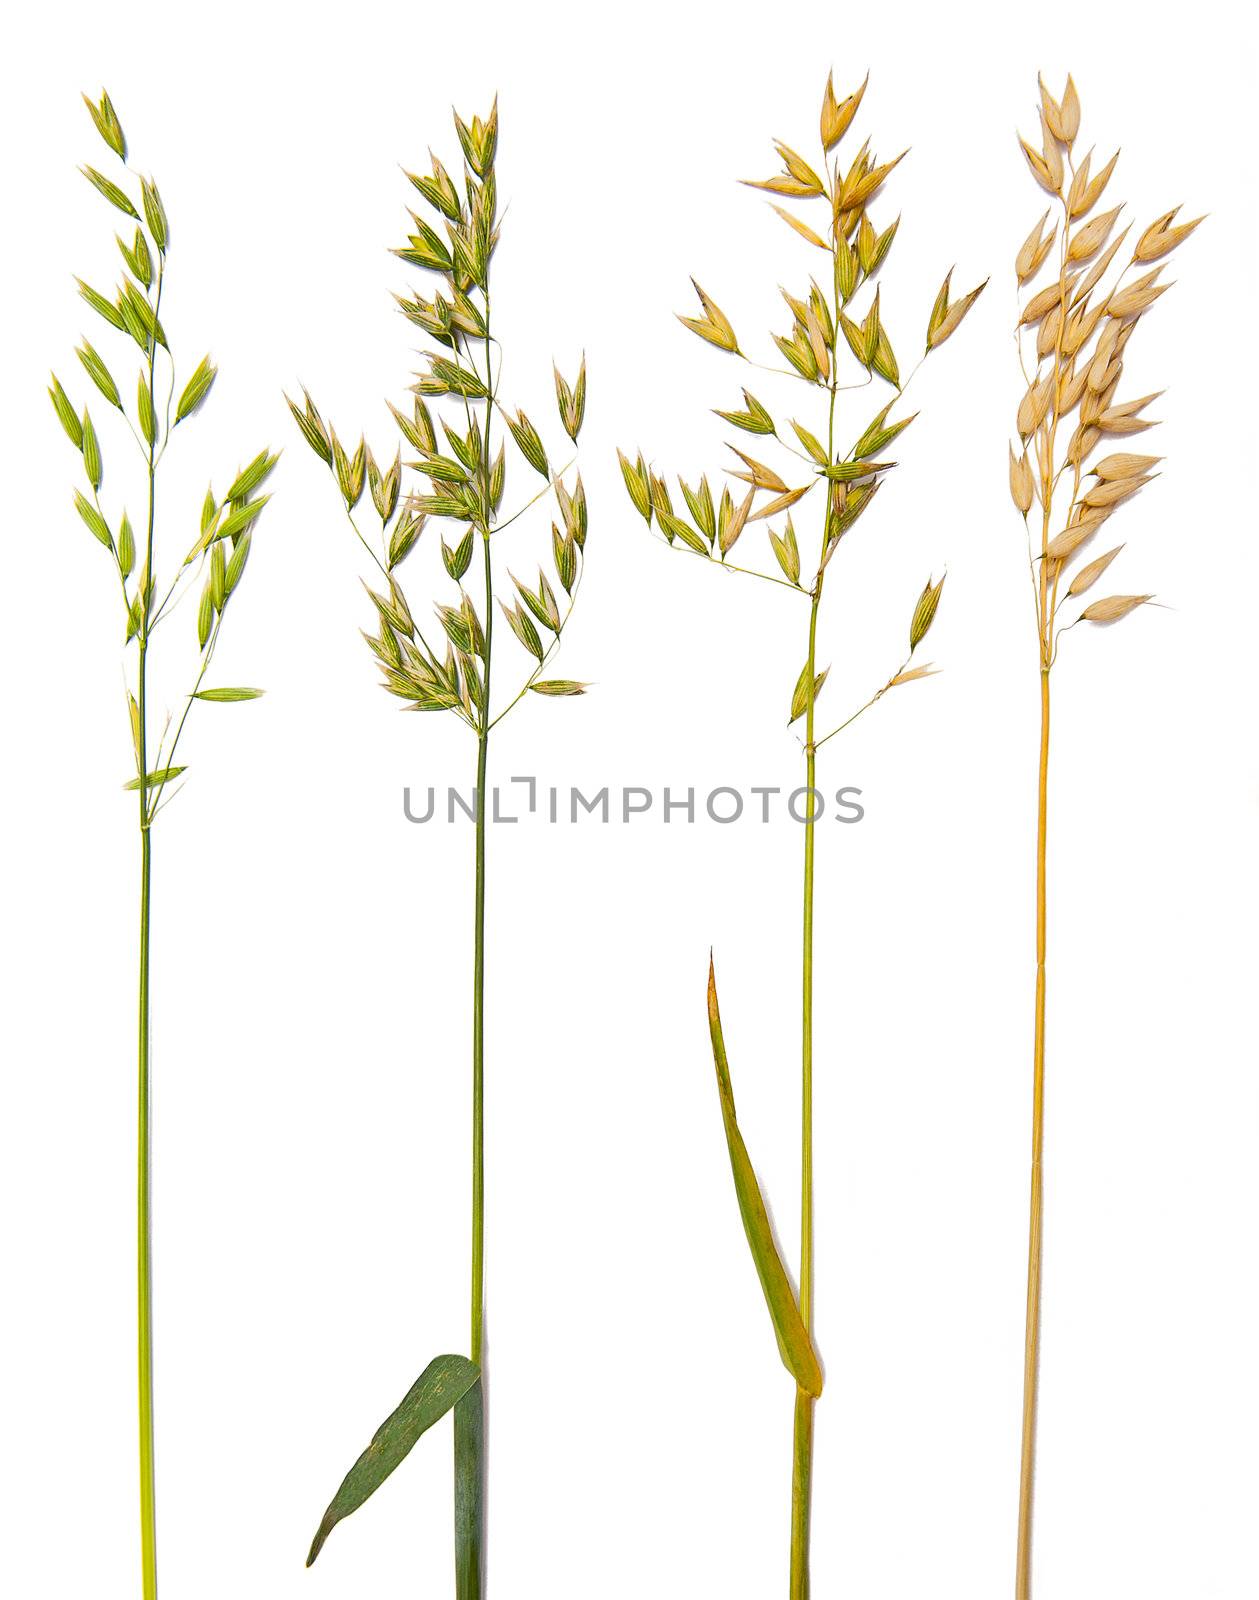 Oat collection with maturing grains